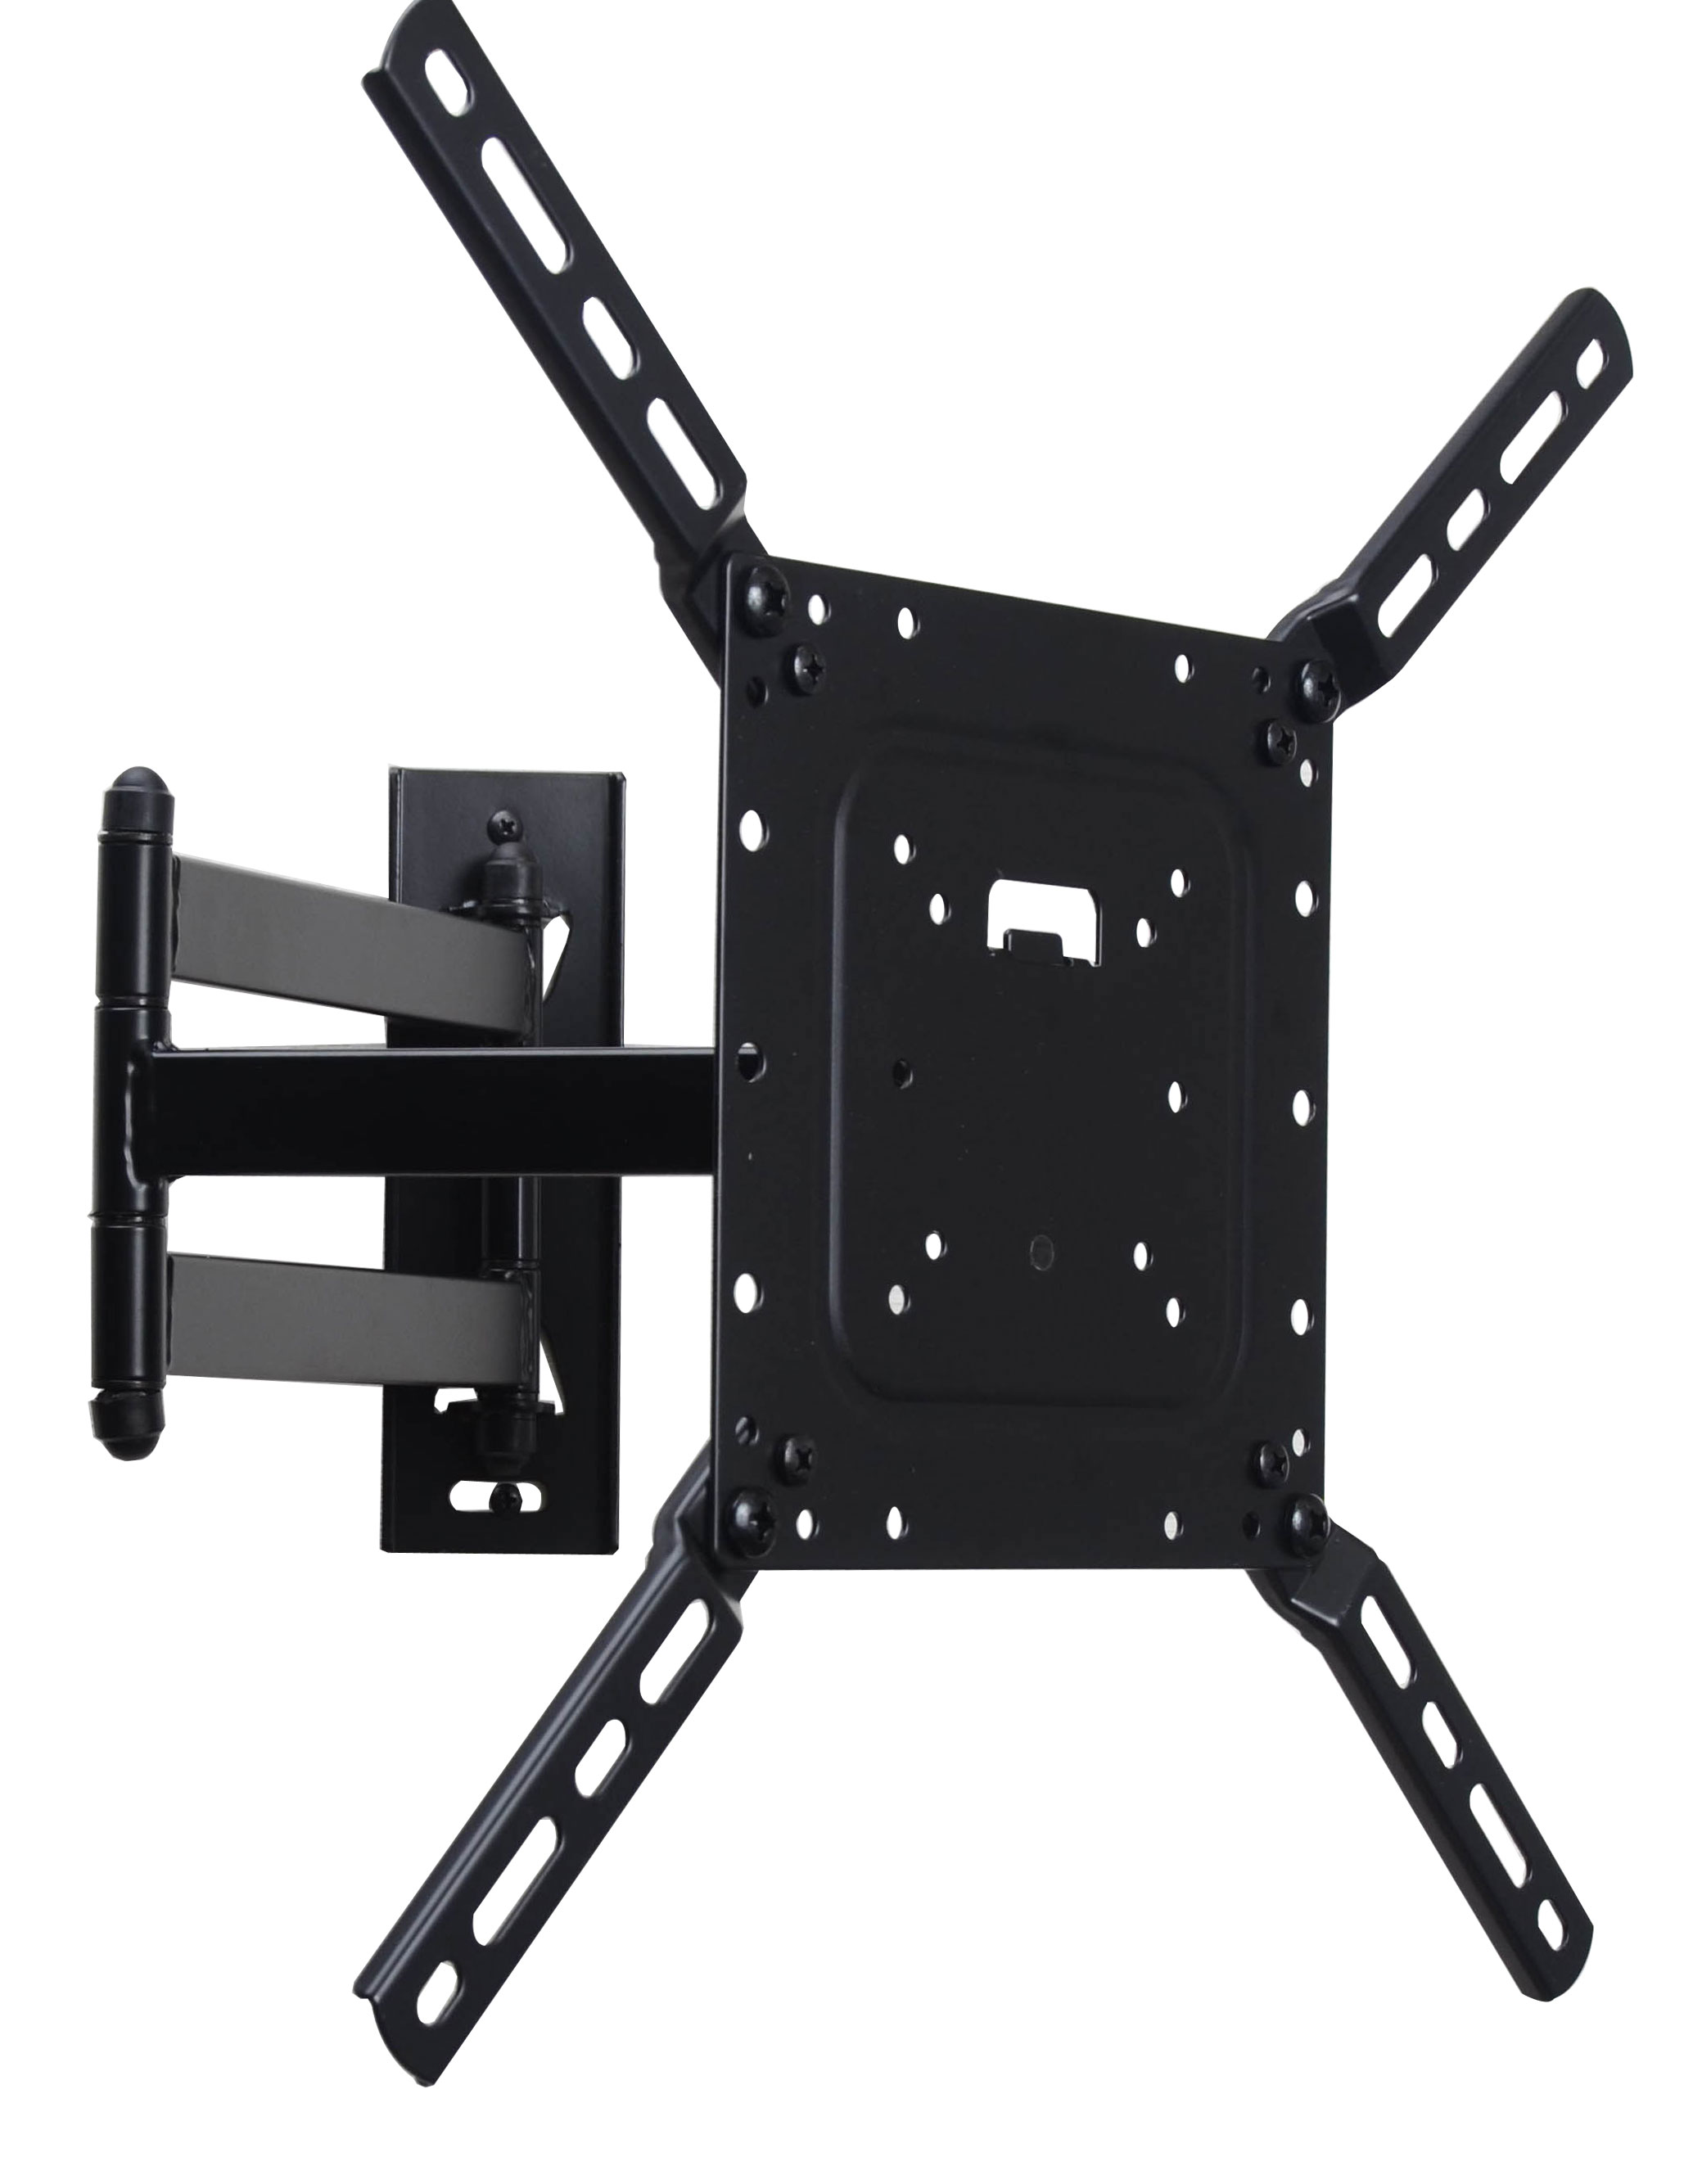 How to Choose A Wall Mount?